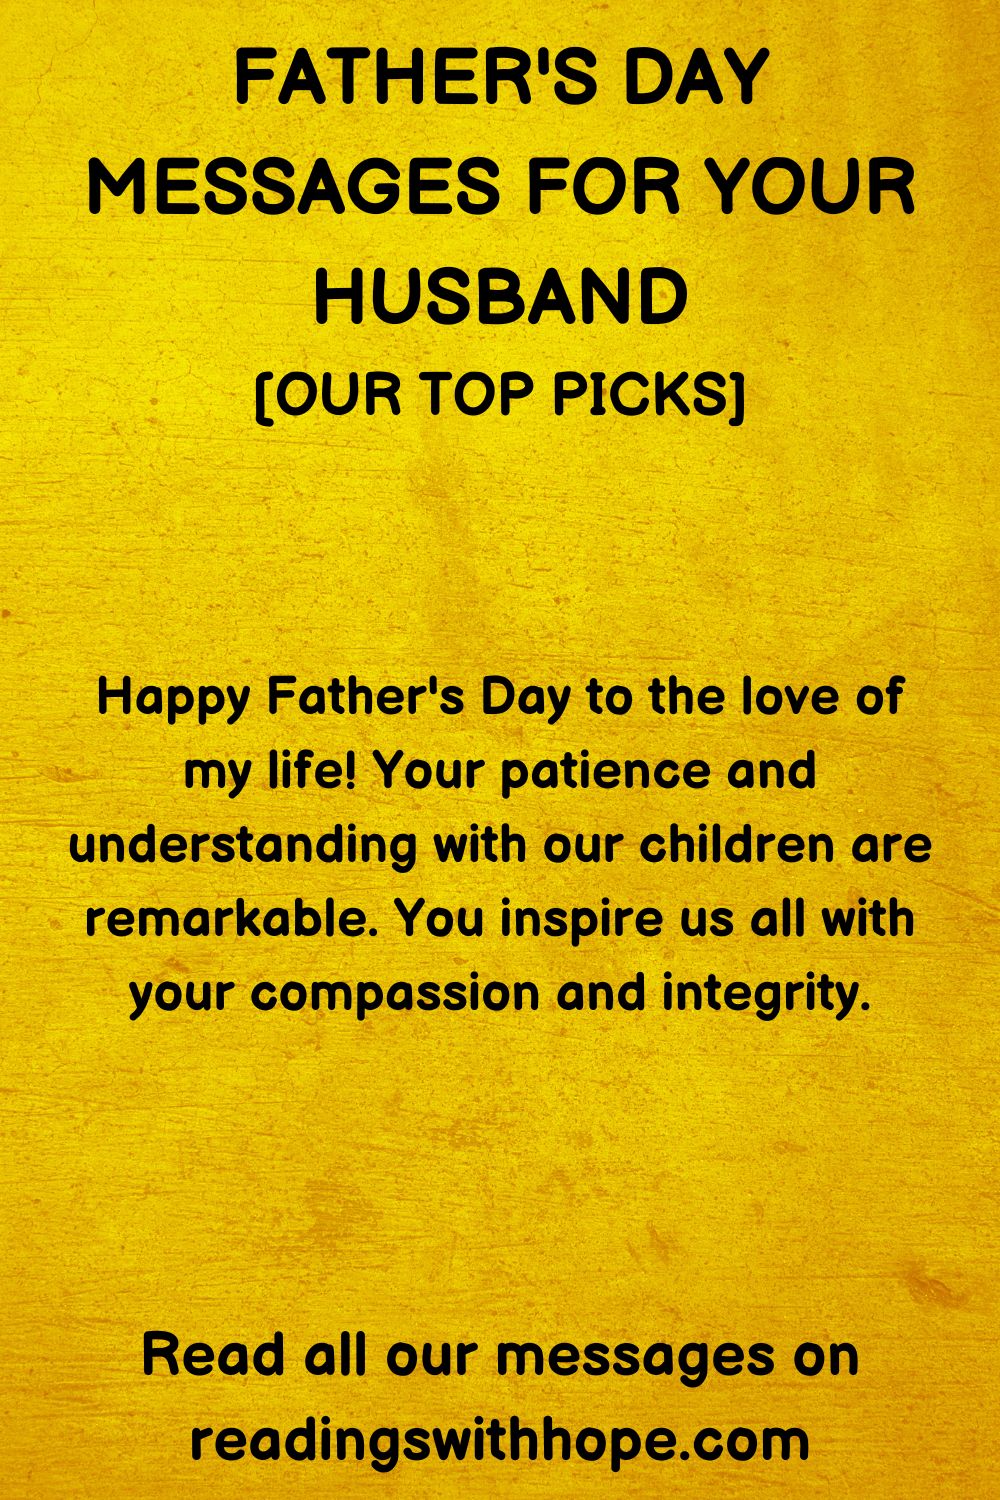 44 Father's Day Messages For Your Husband